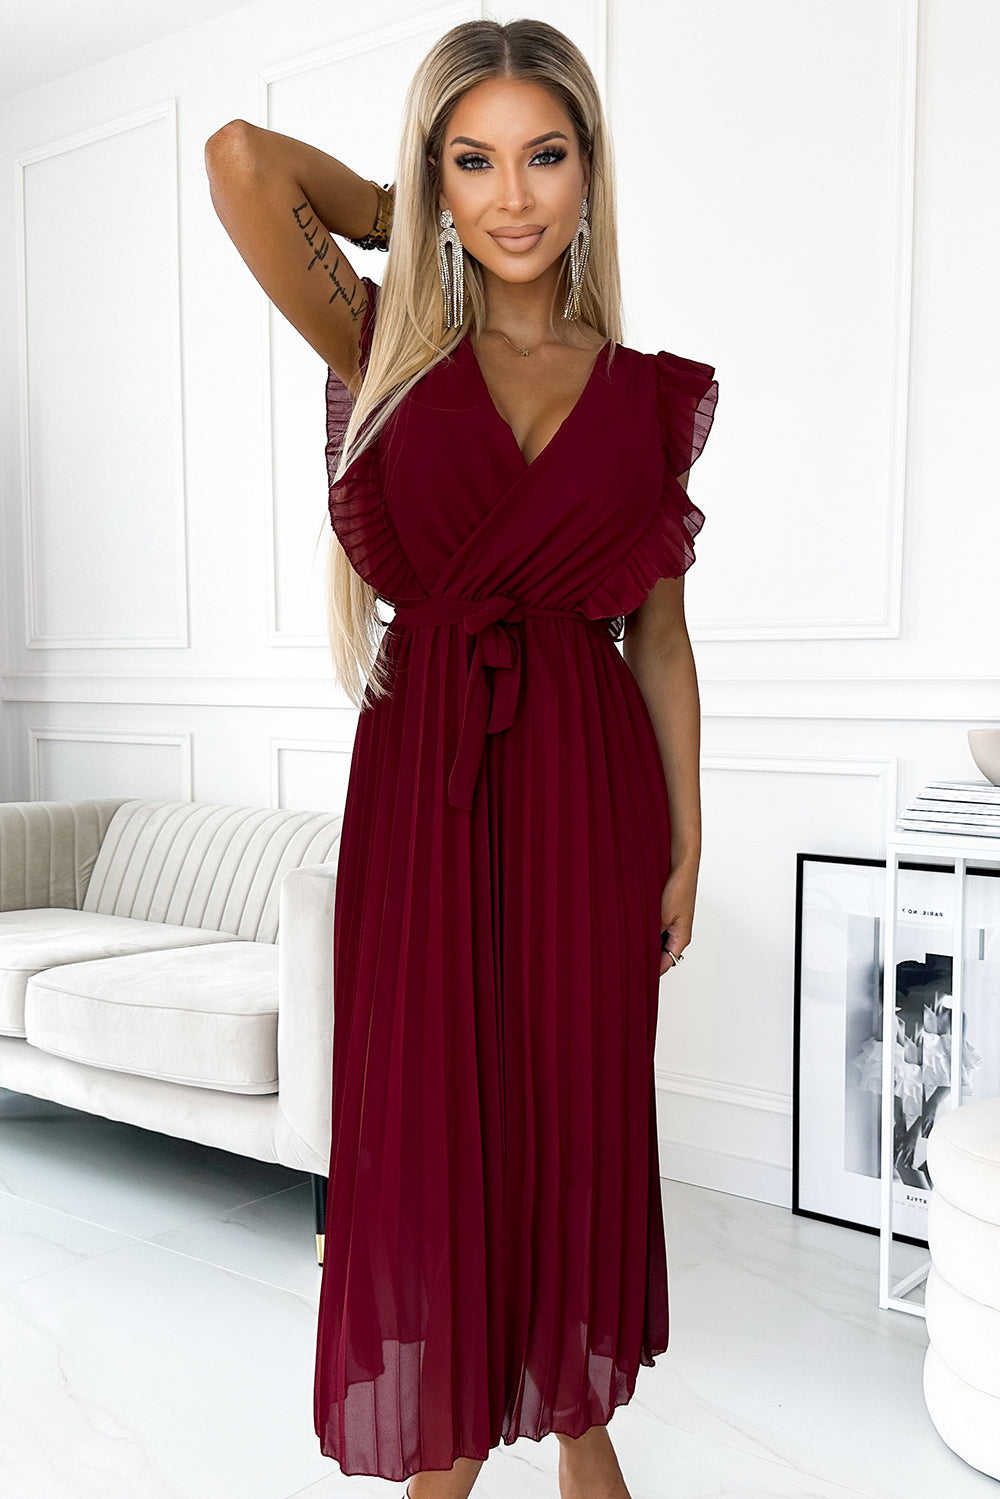 18241-4-469-1 Pleated dress with frills, neckline and belt - burgundy-4